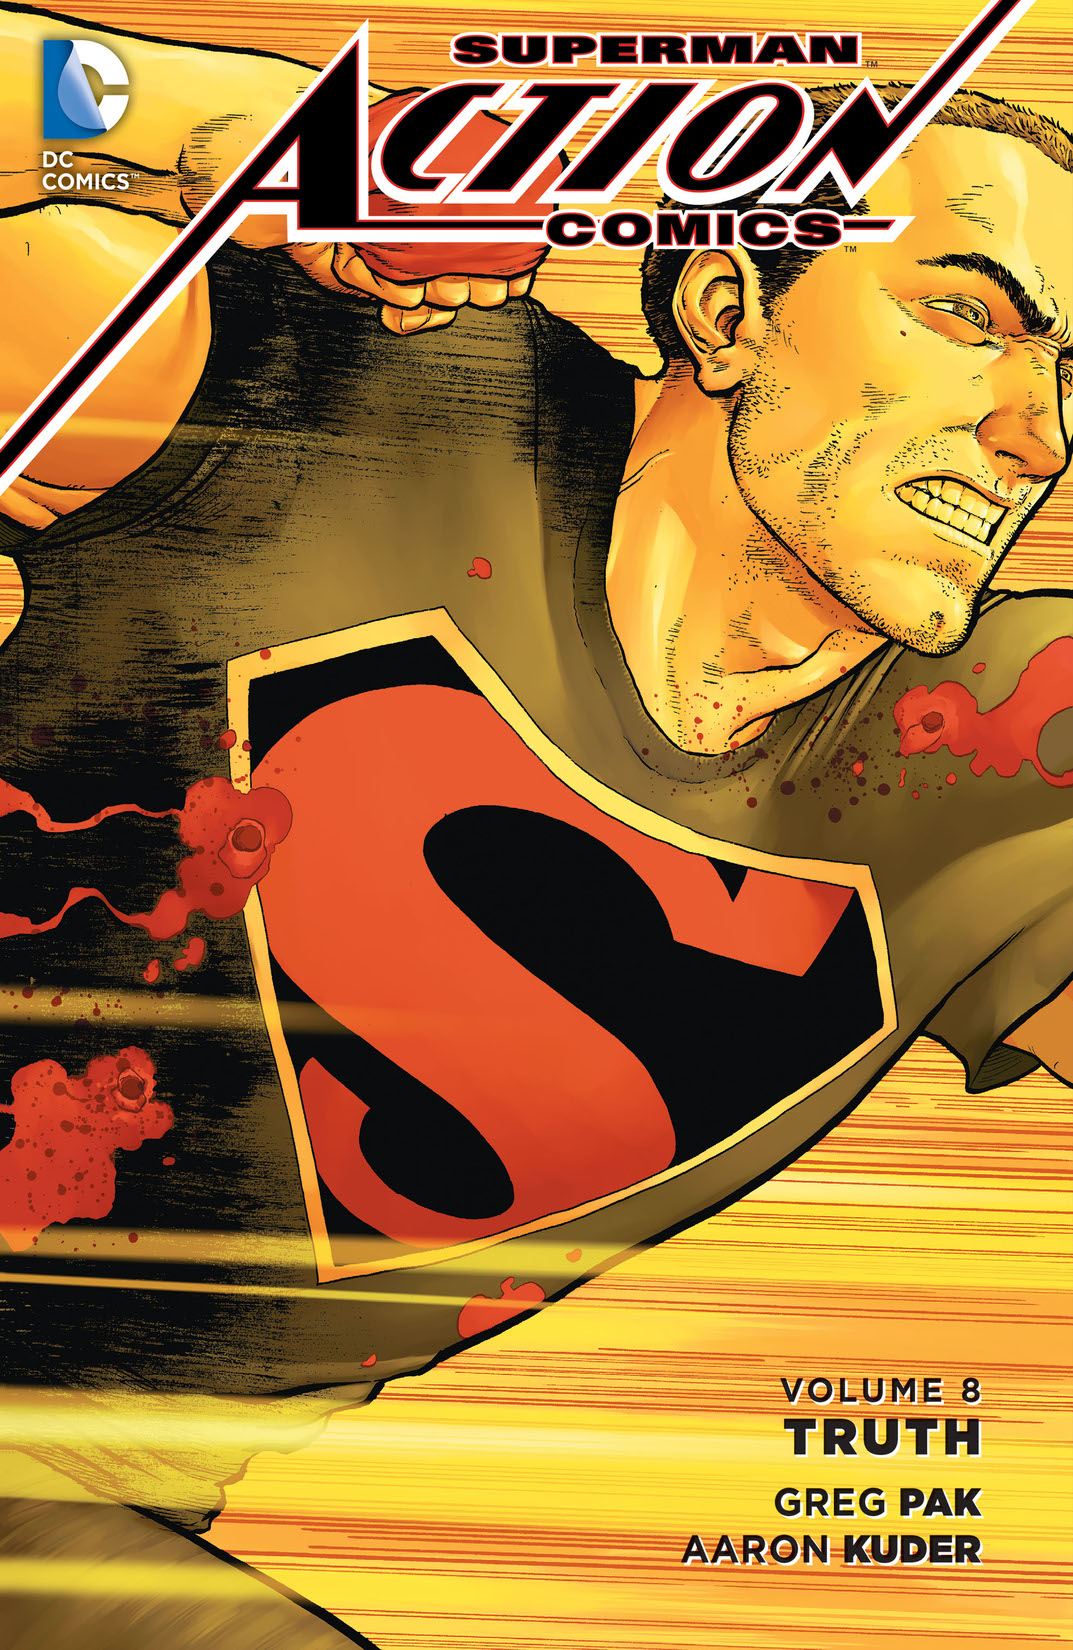 Superman - Action Comics Vol. 8: Truth preview images